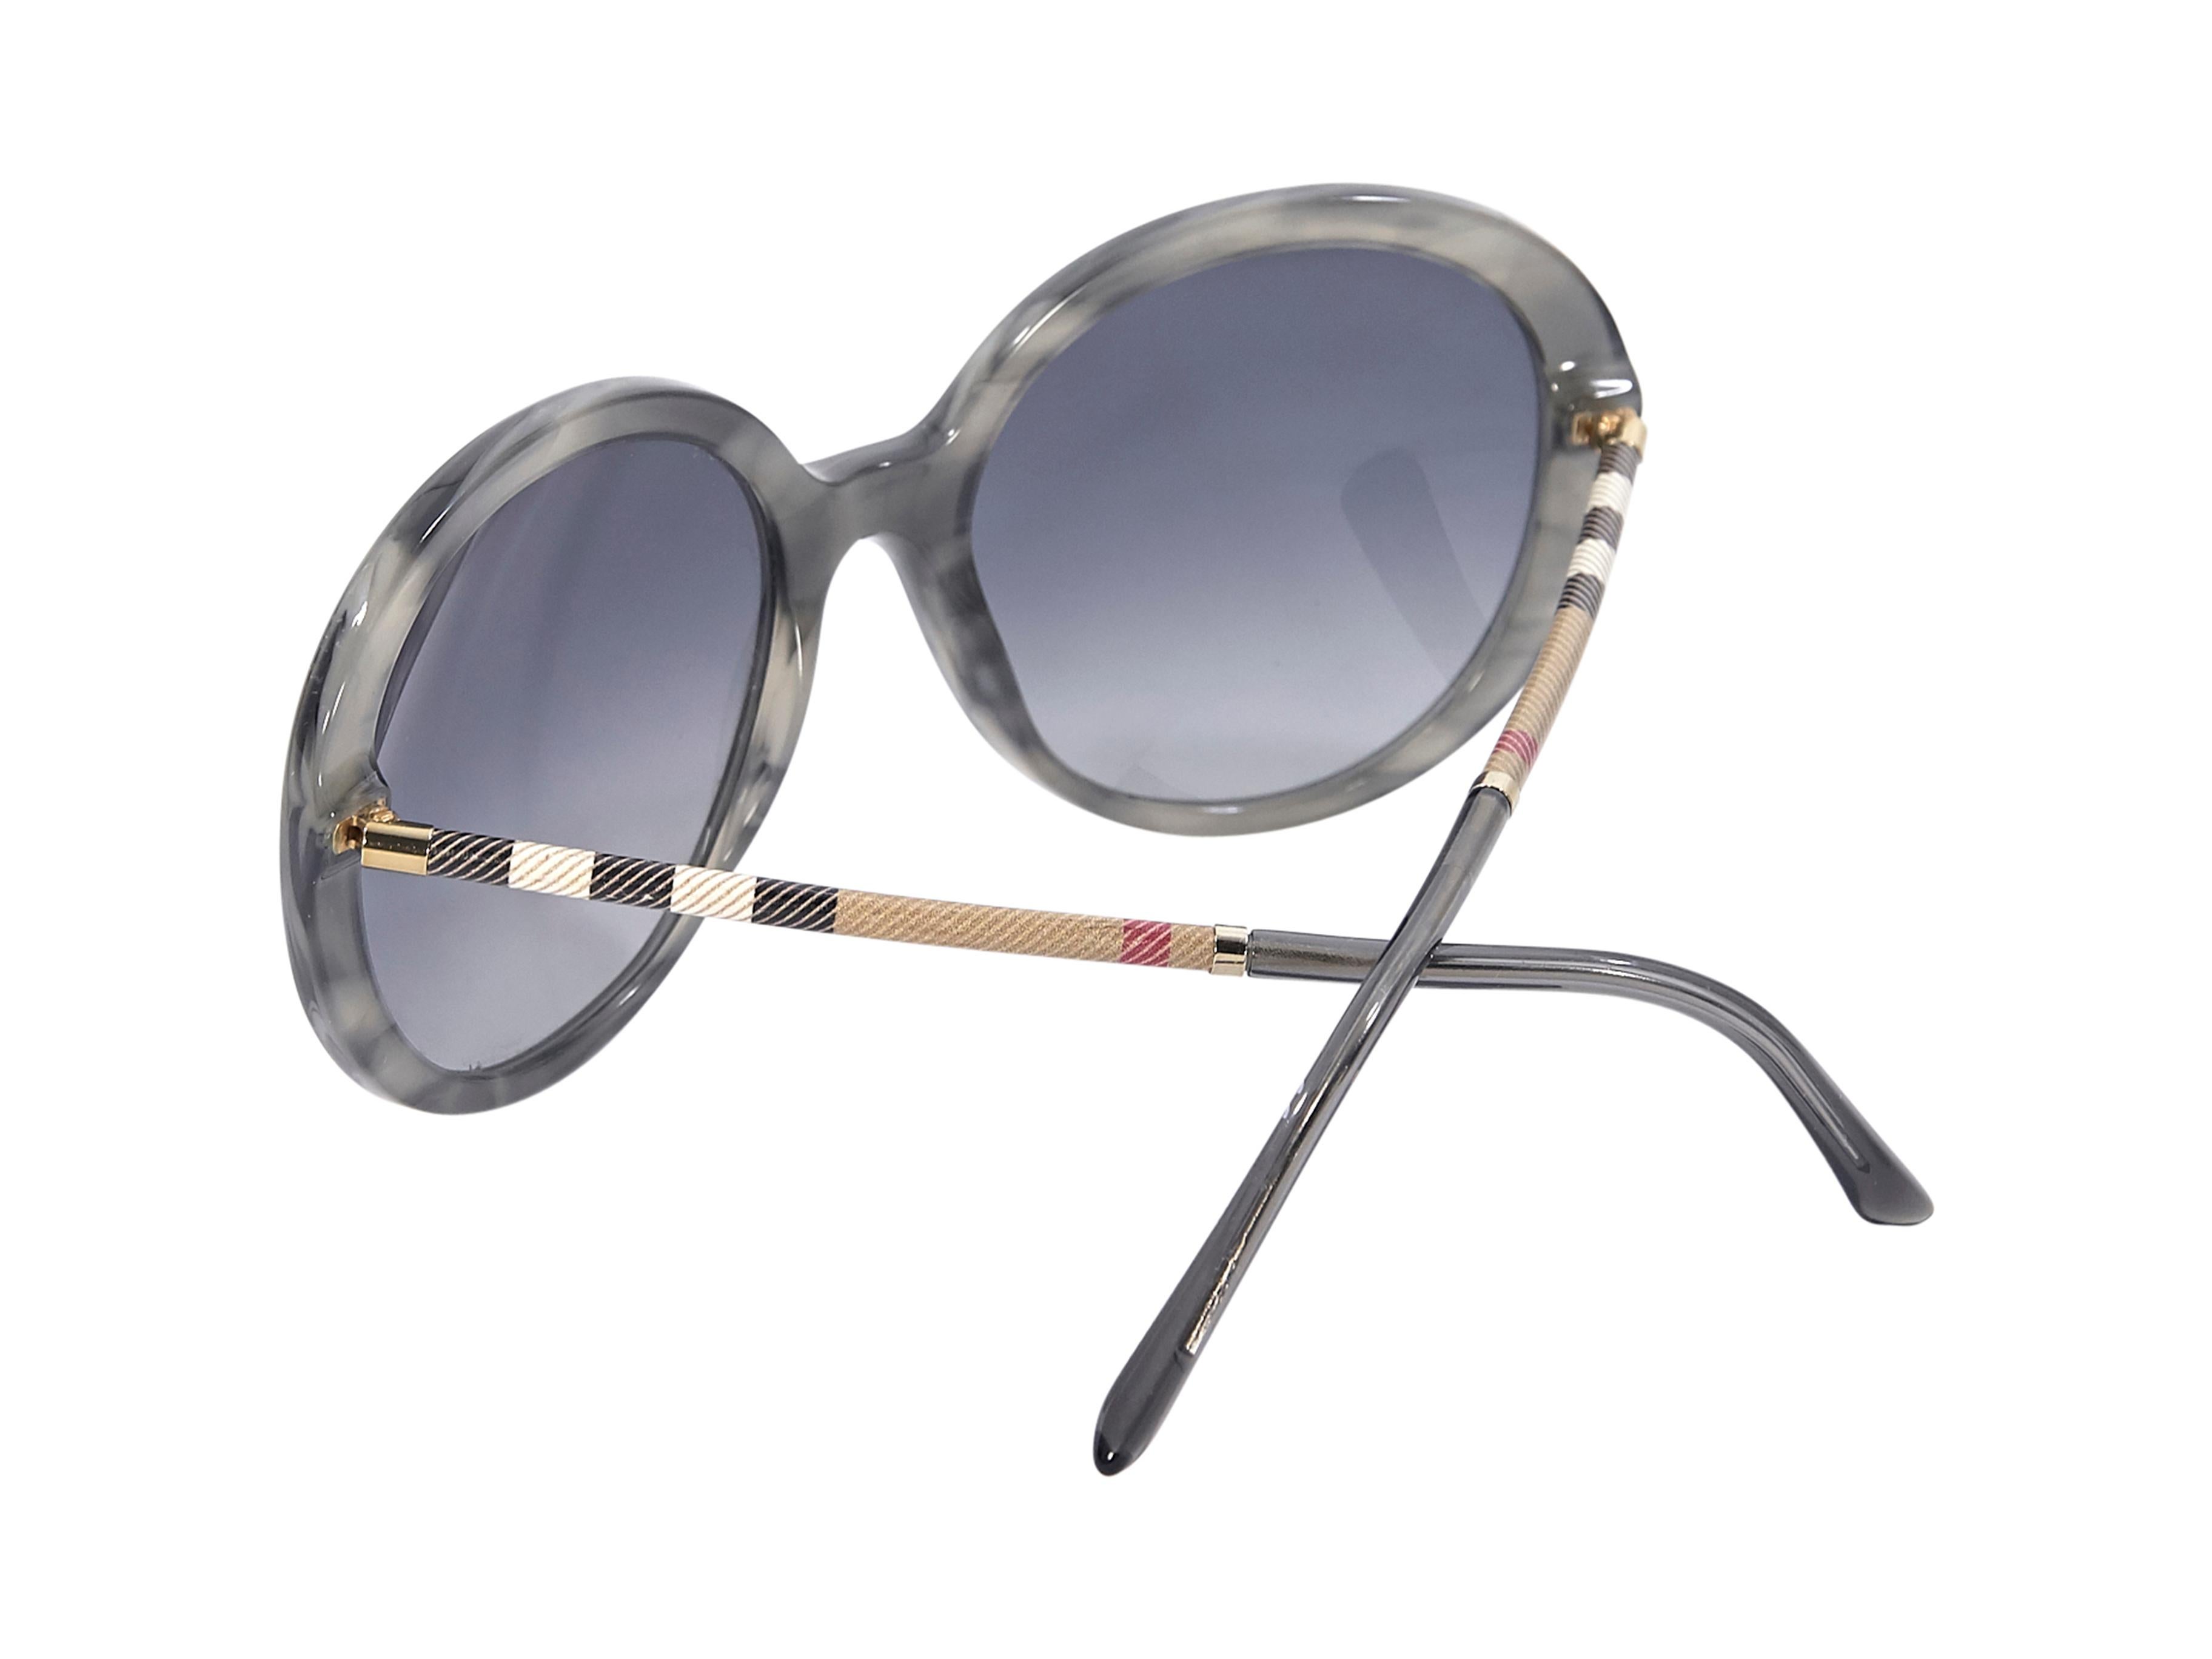 Product details:  Grey tortoise shell round sunglasses by Burberry.  Gradient lenses.  Plaid checked stems.  2.25